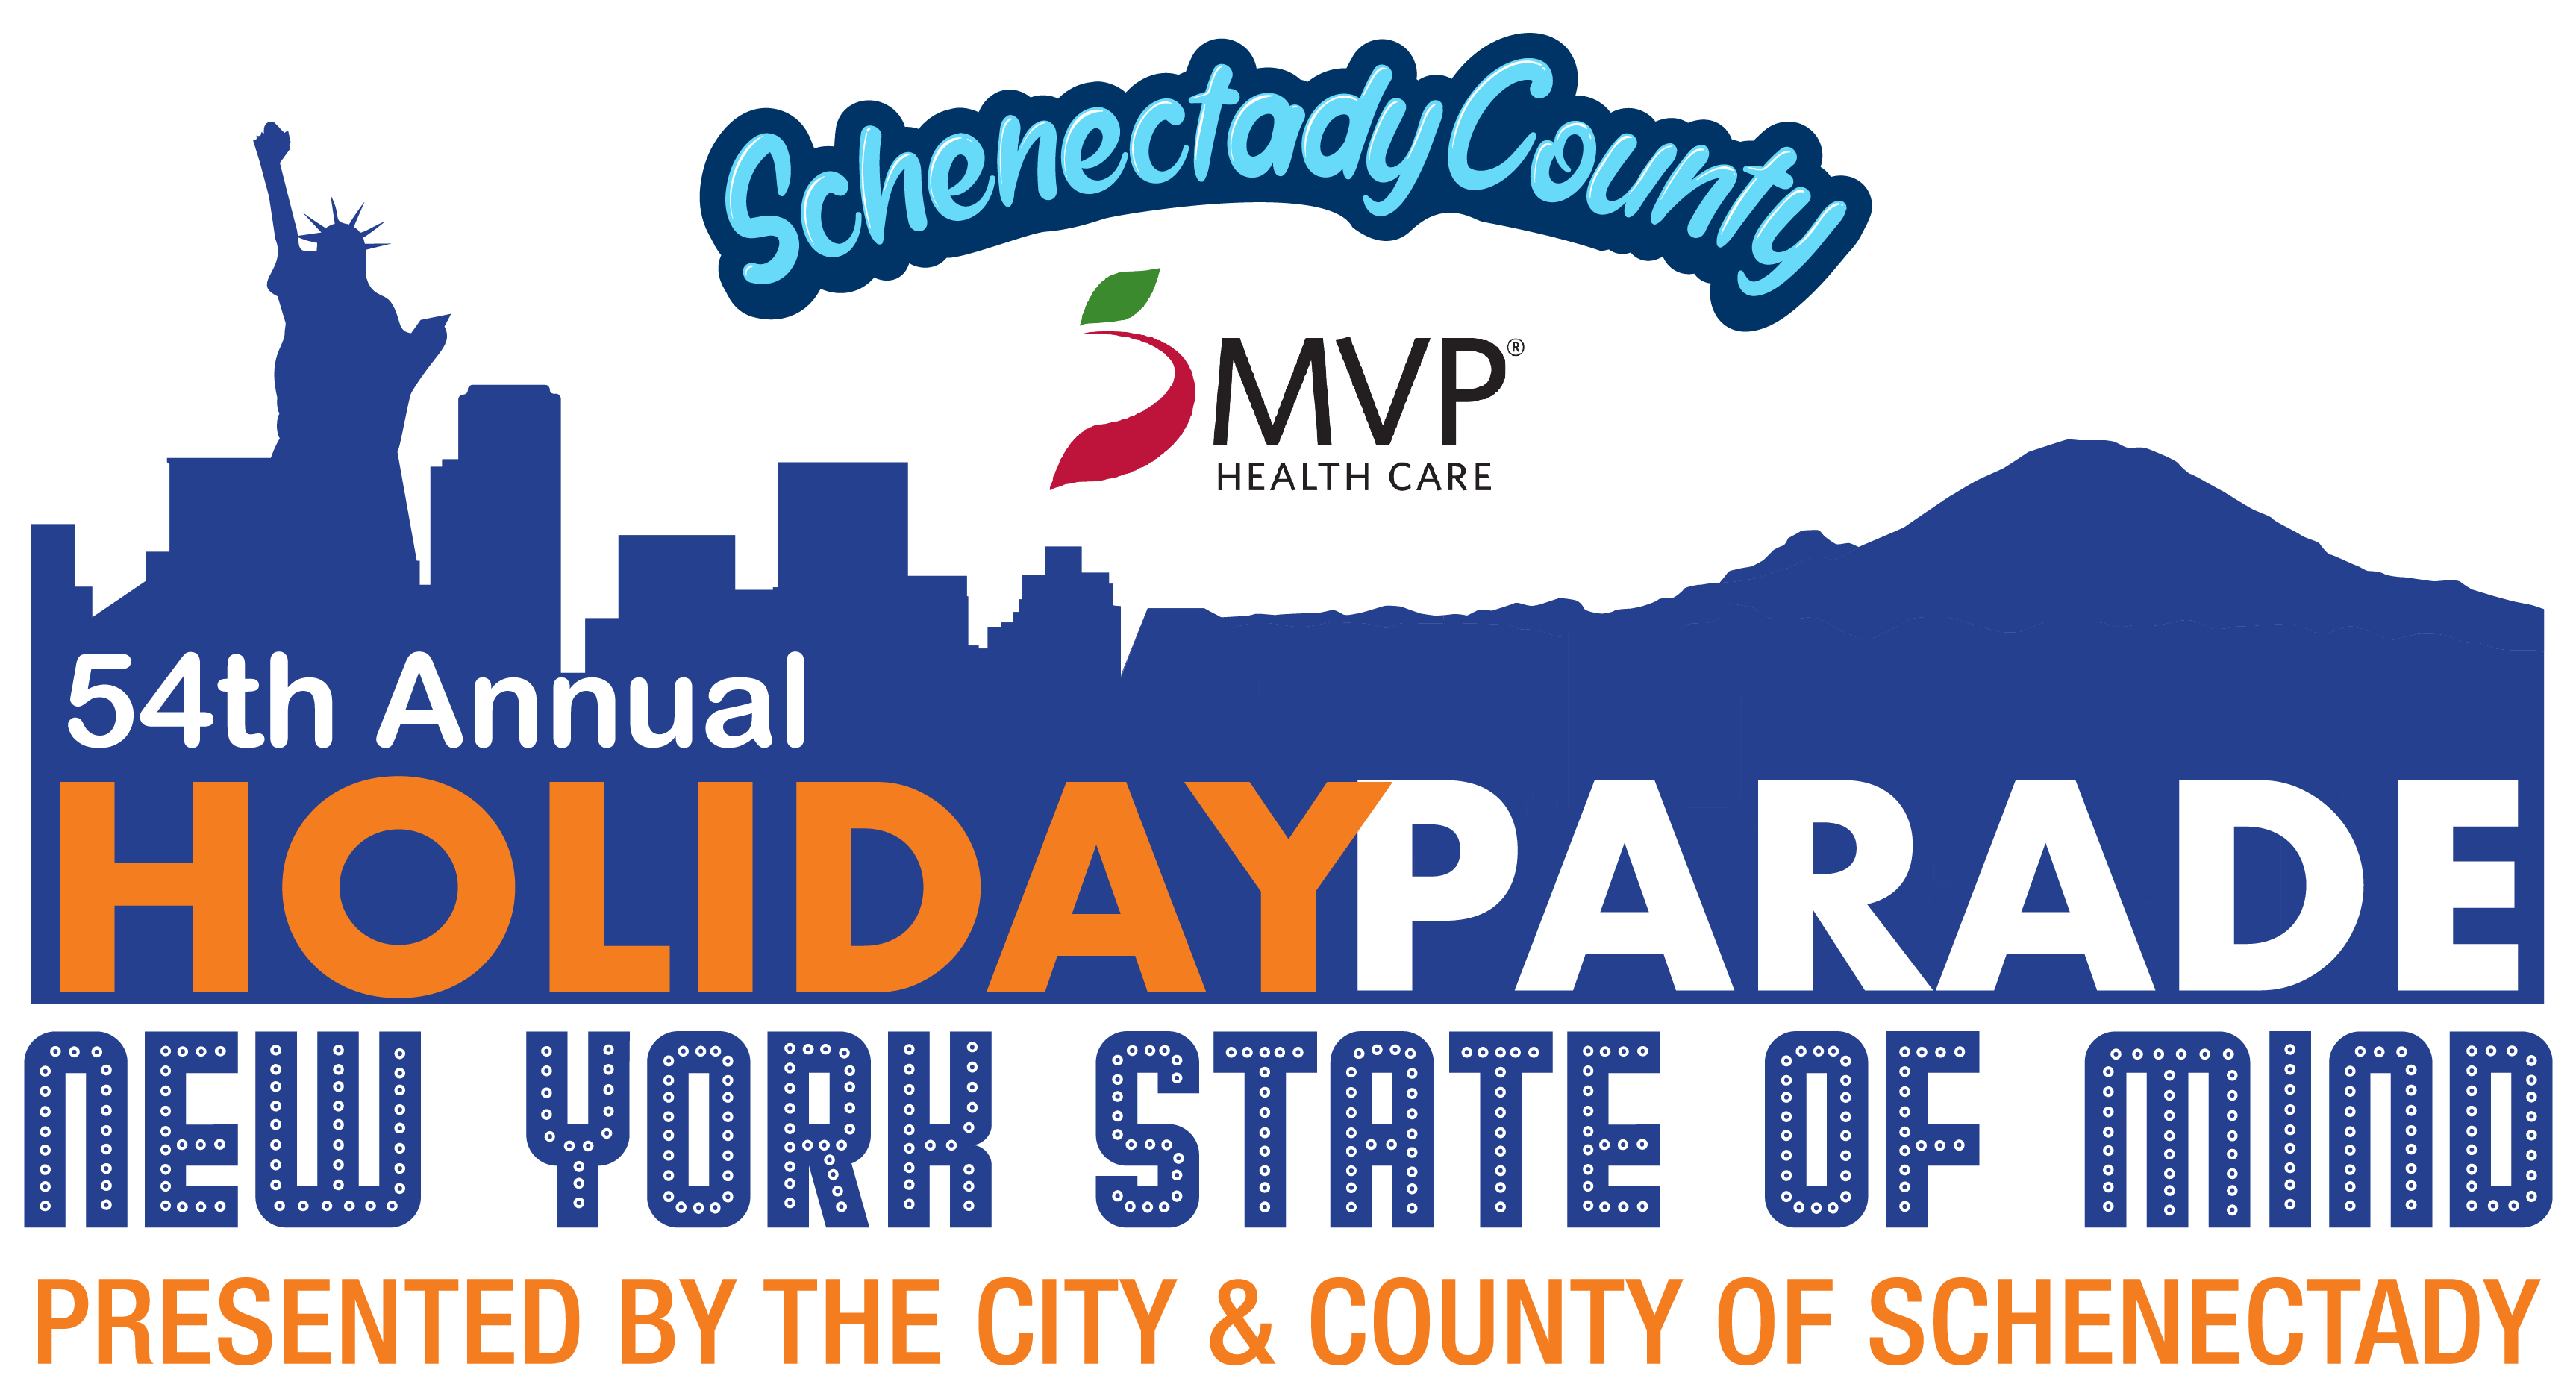 Blue silhouette of New York City and Adirondack Mountains with the text Schenectady County and MVP above the silhouette and 54th Annual Holiday Parade, New York State of Mind, Presented by the City and County of Schenectady below.